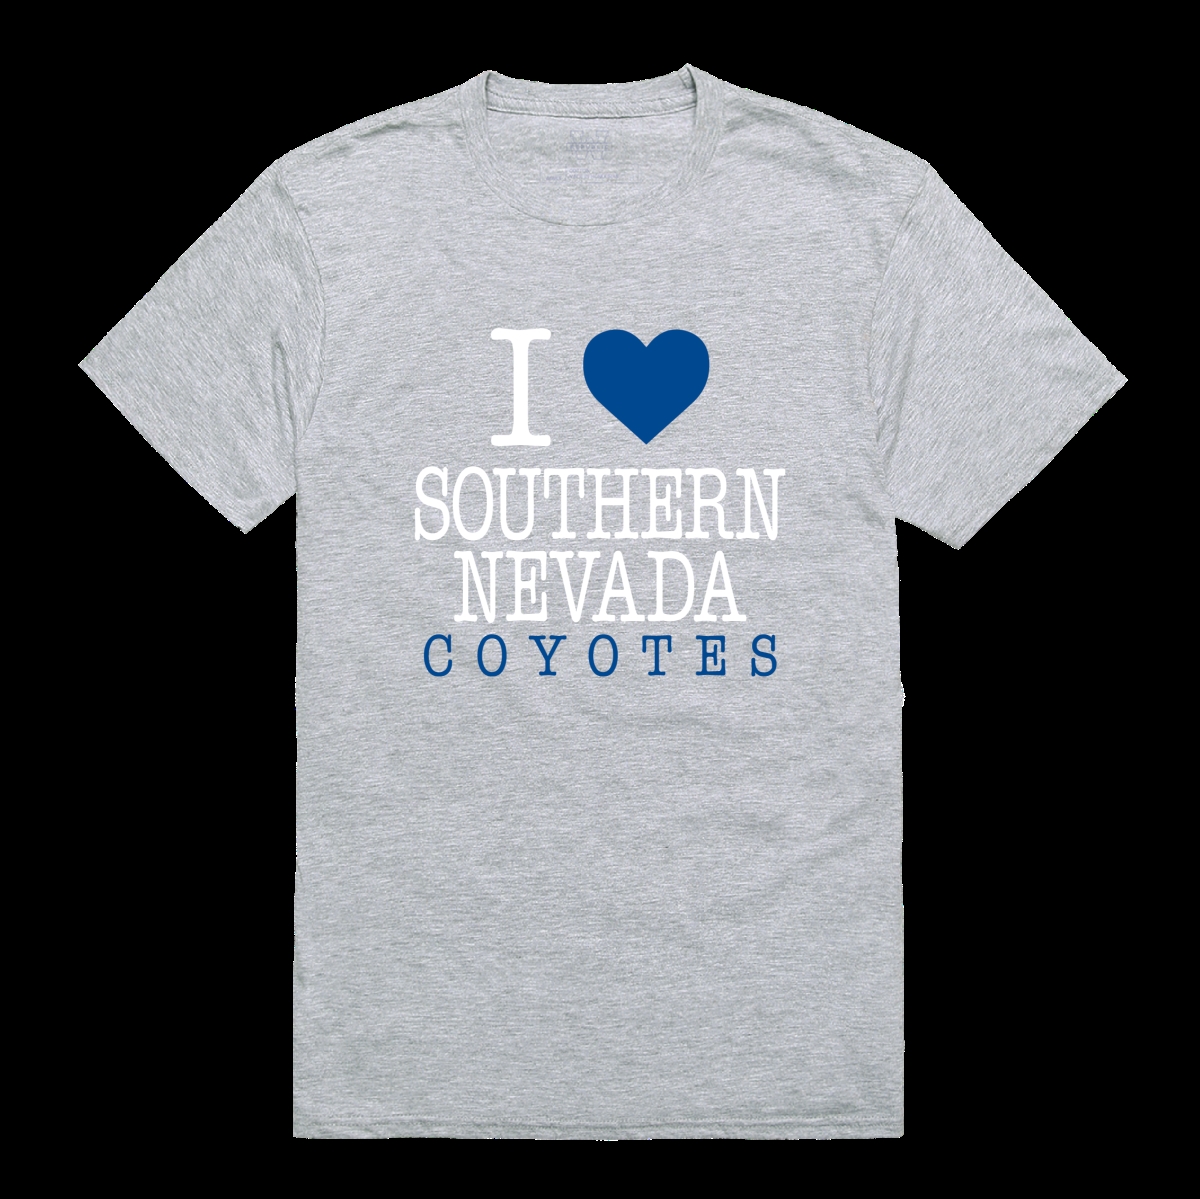 W Republic 551-672-HGY-03 College of Southern Nevada Coyotes I Love T-Shirt&#44; Heather Grey - Large